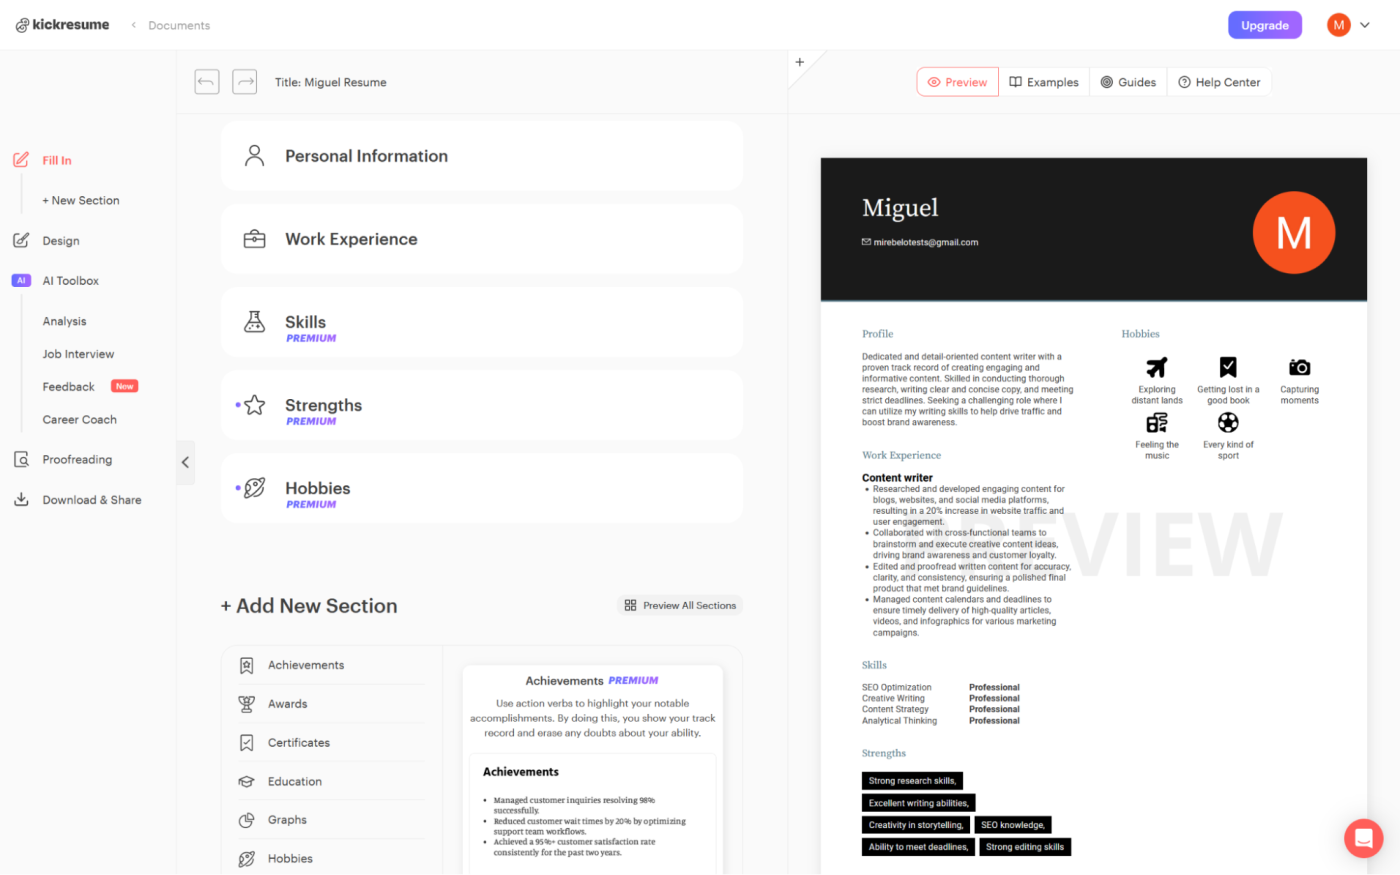 Teal, our pick for the best resume builder for generating a resume from scratch